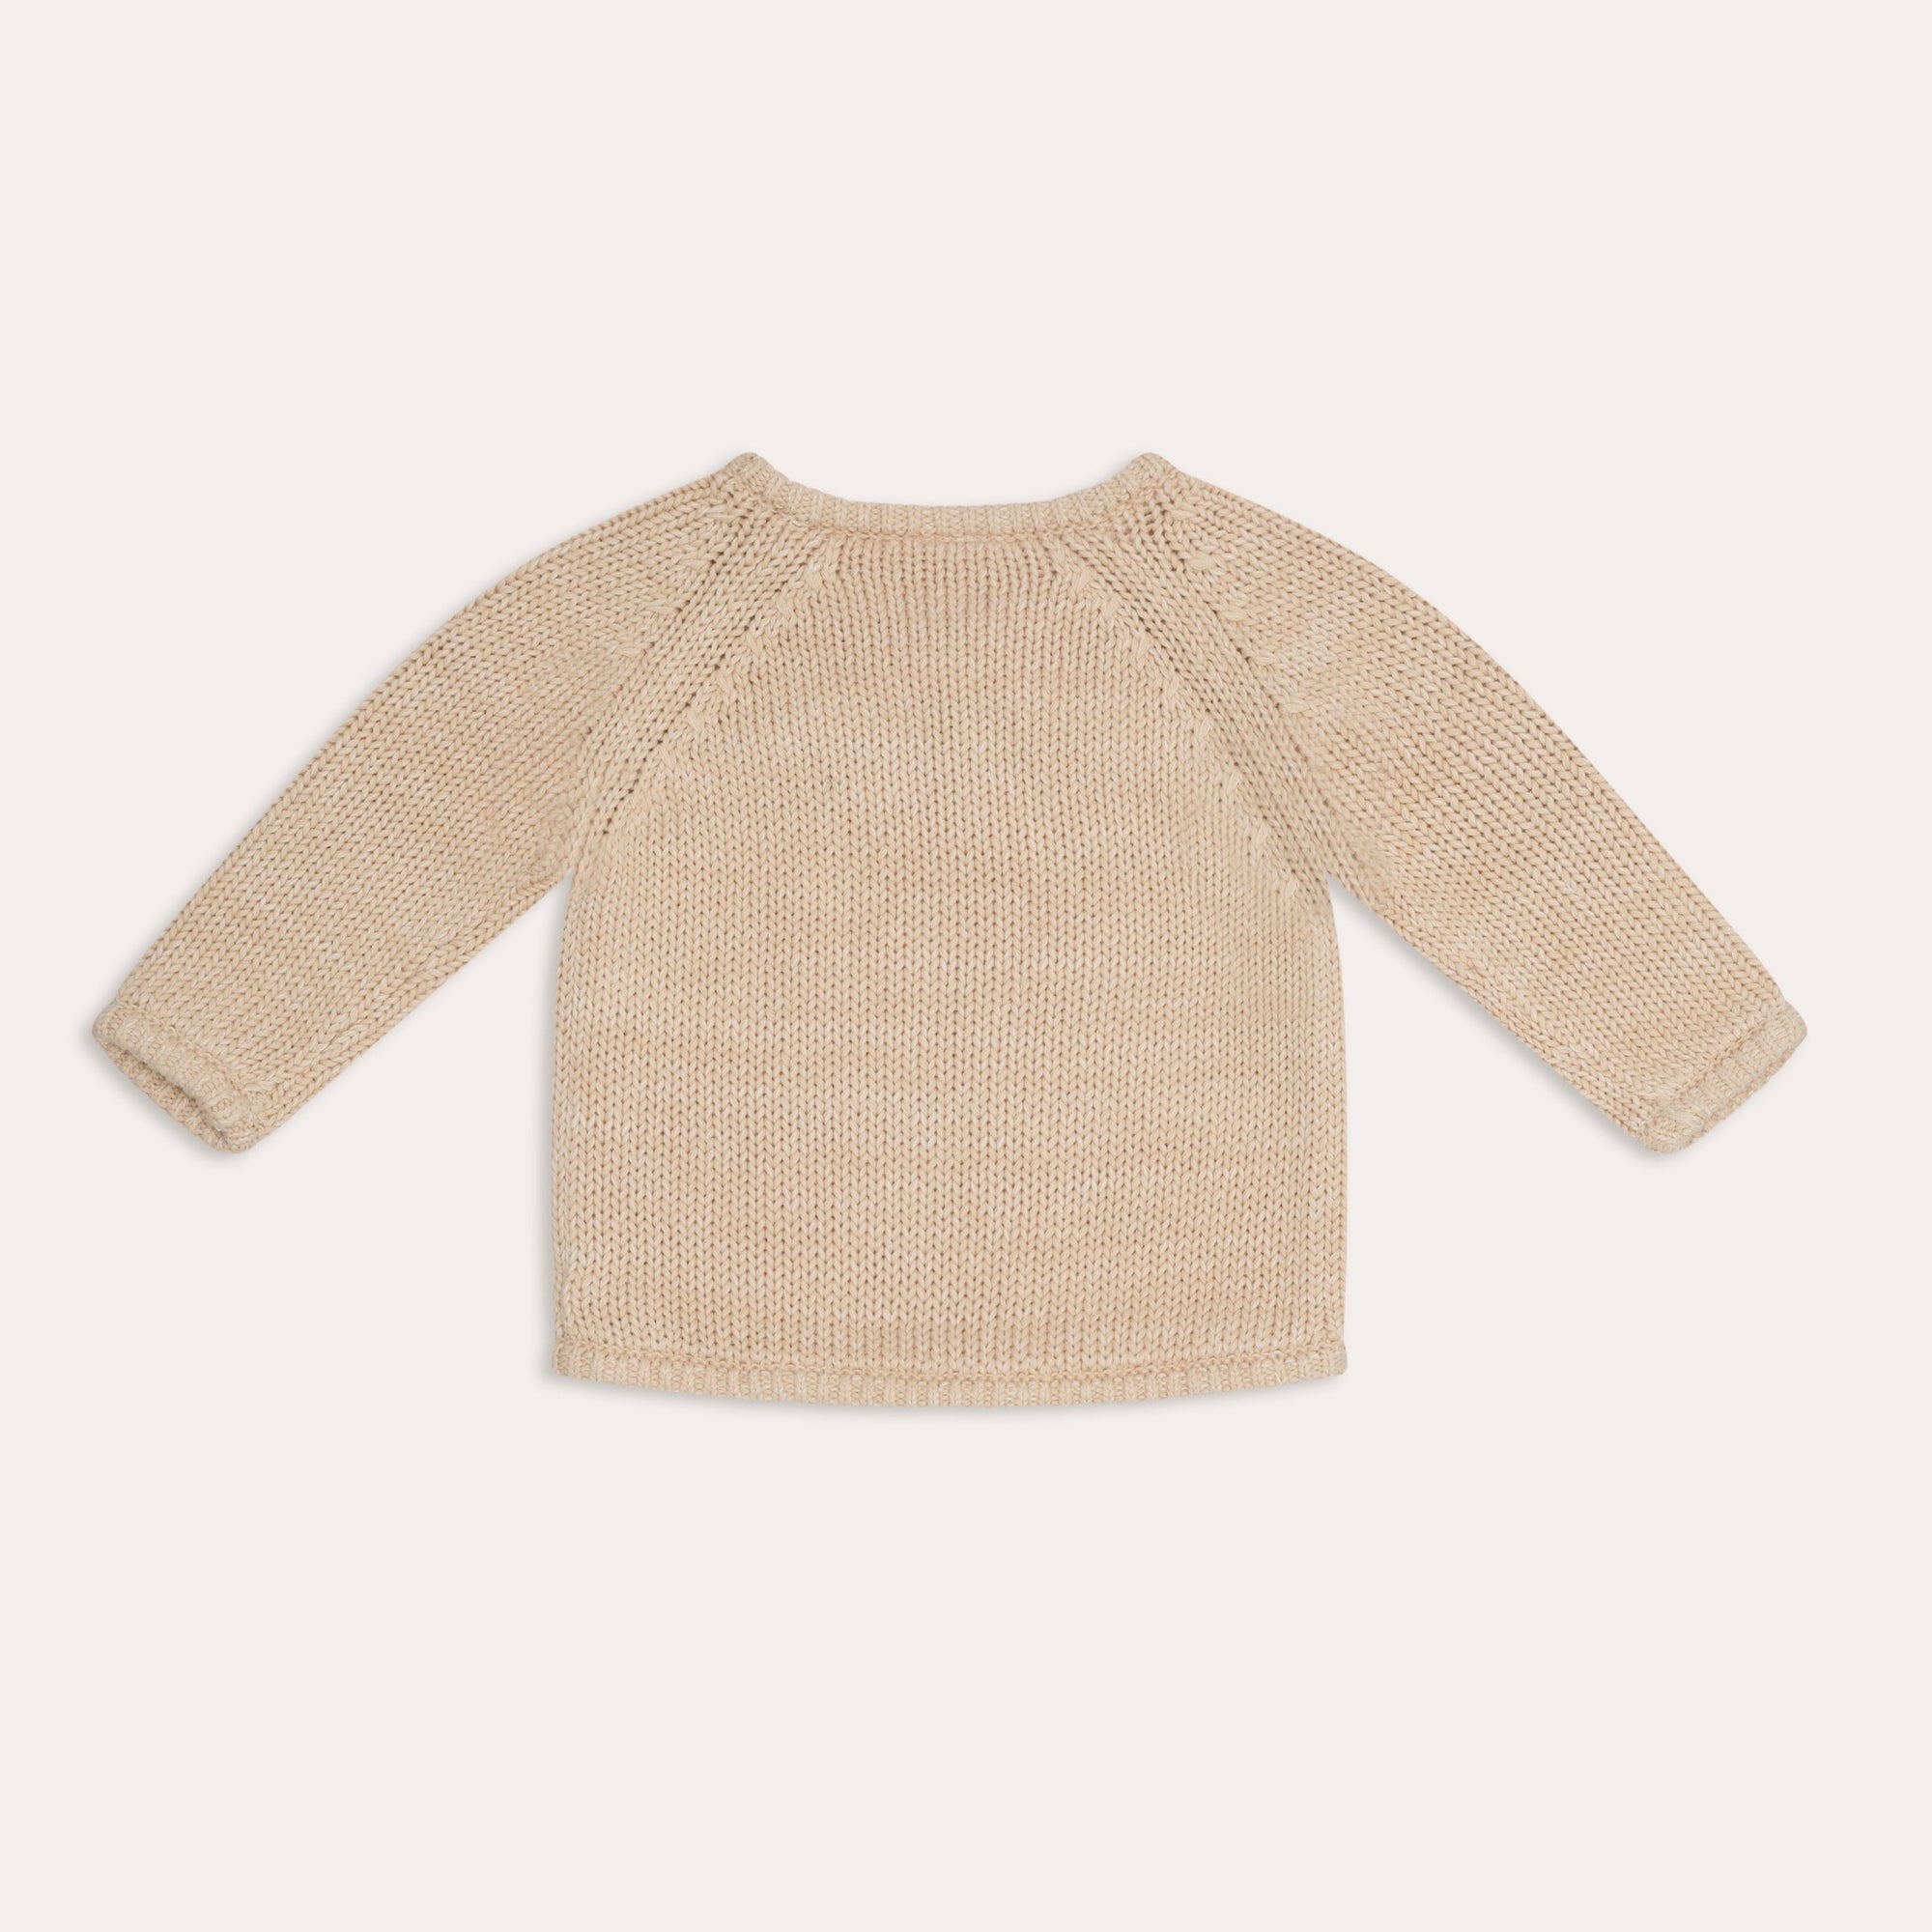 The back view of an illoura knit poet jumper in beige, from Illoura the Label.